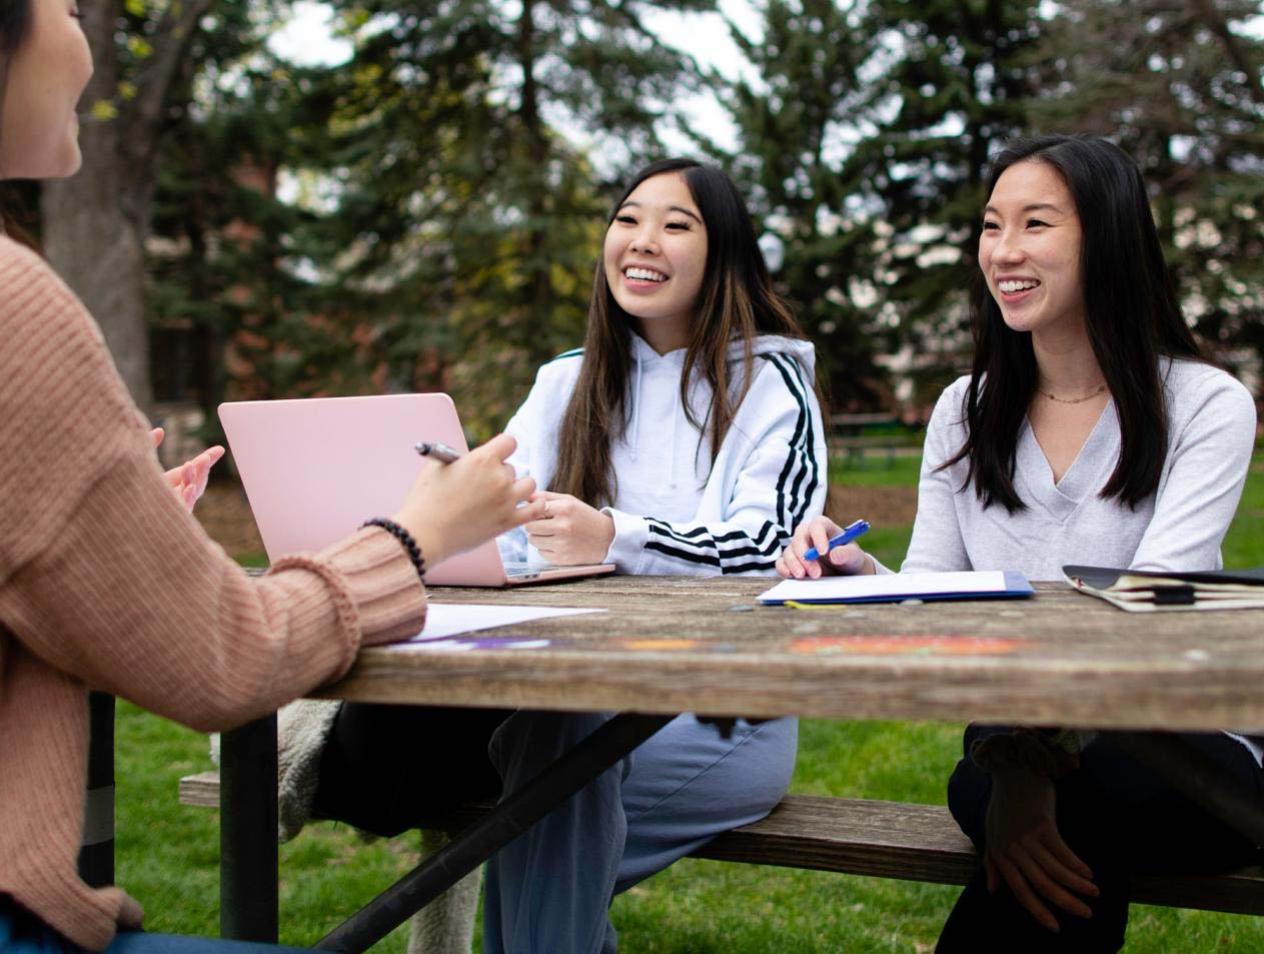 Three women sitting at table outdoors smiling and studying.